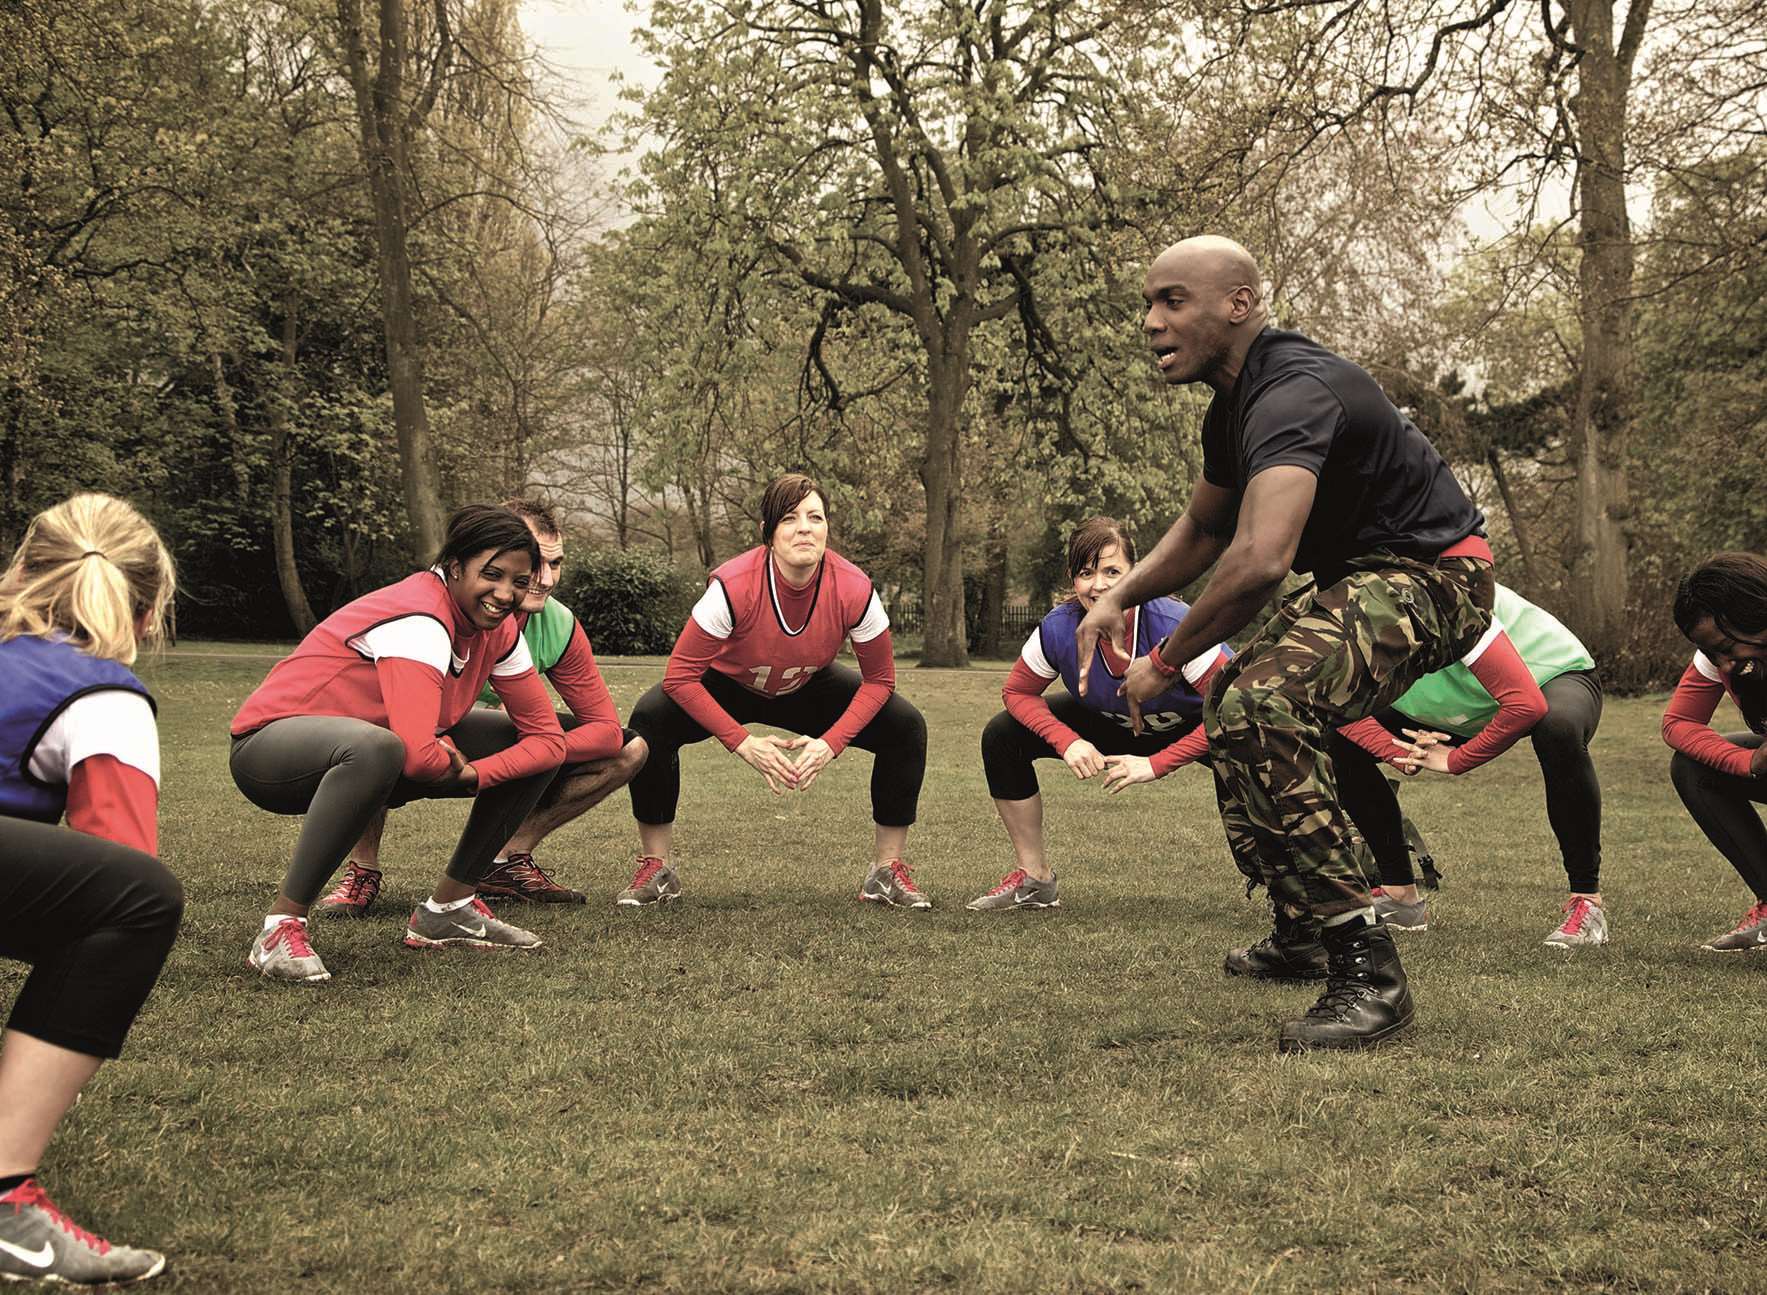 The fitness event will take place in Tunbridge Wells